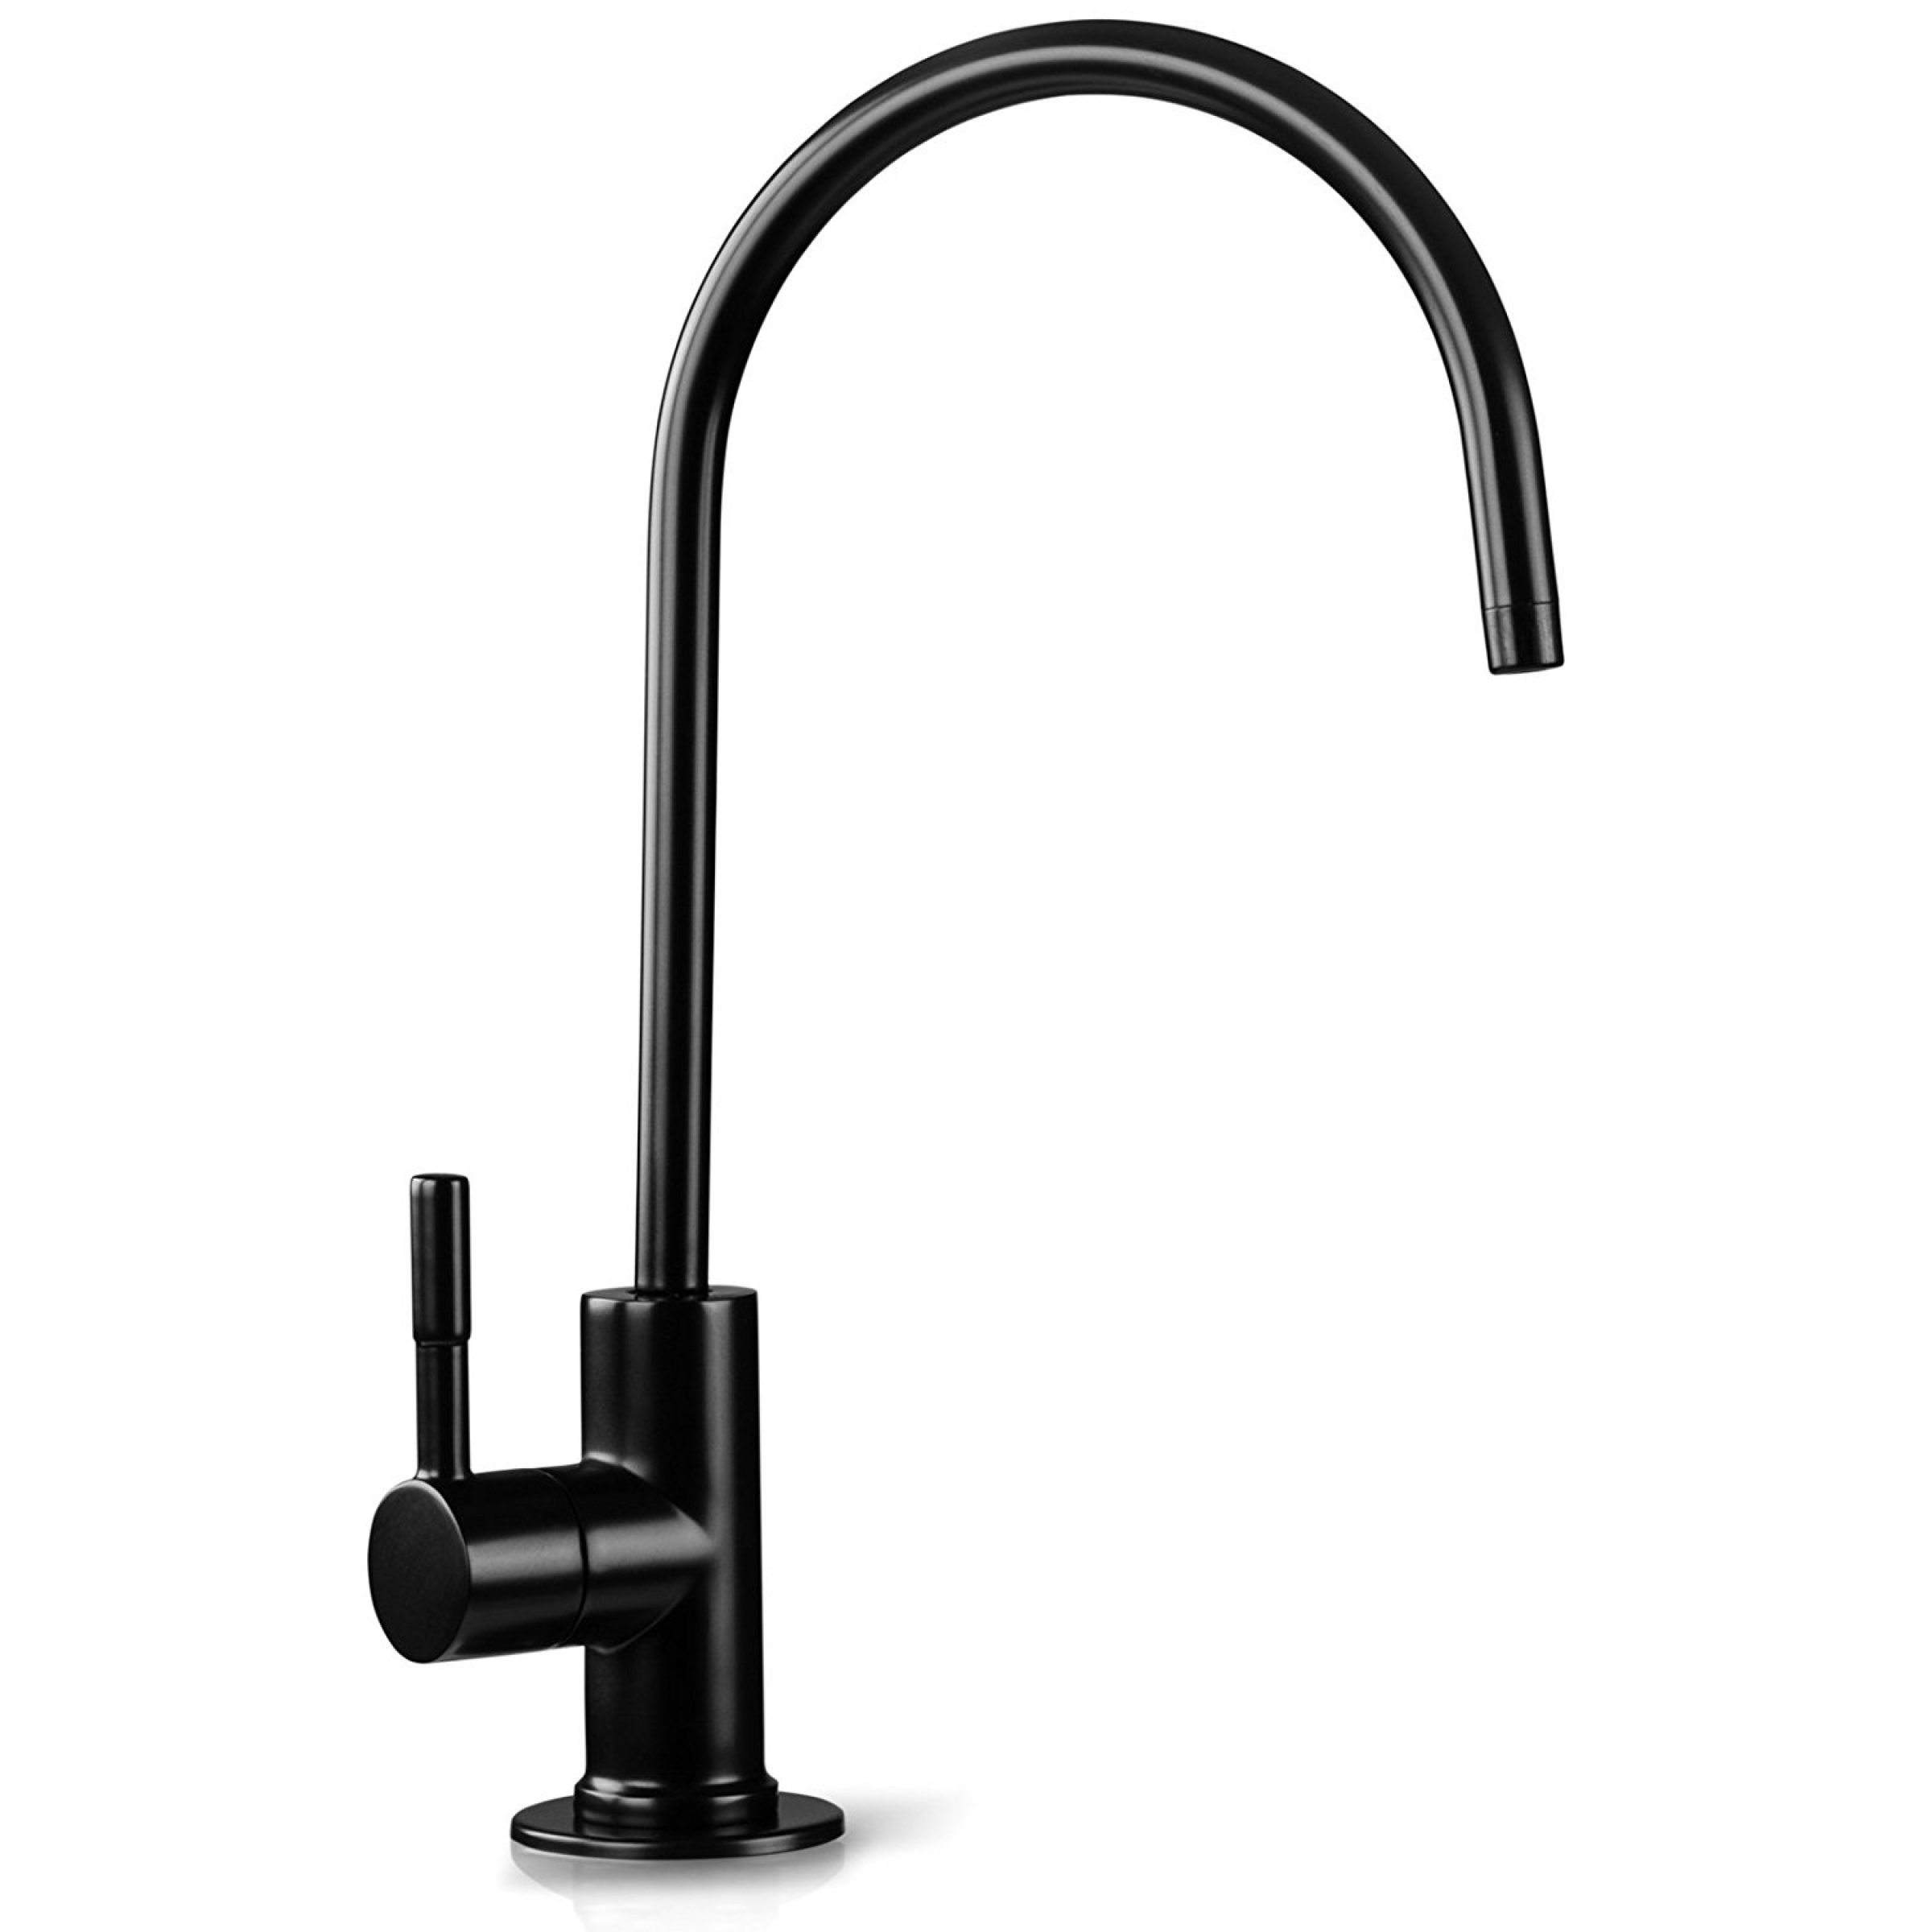 iSpring GA1ORB Reverse Osmosis Faucet, LeadFree Contemporary Drinking Water Faucet for RO